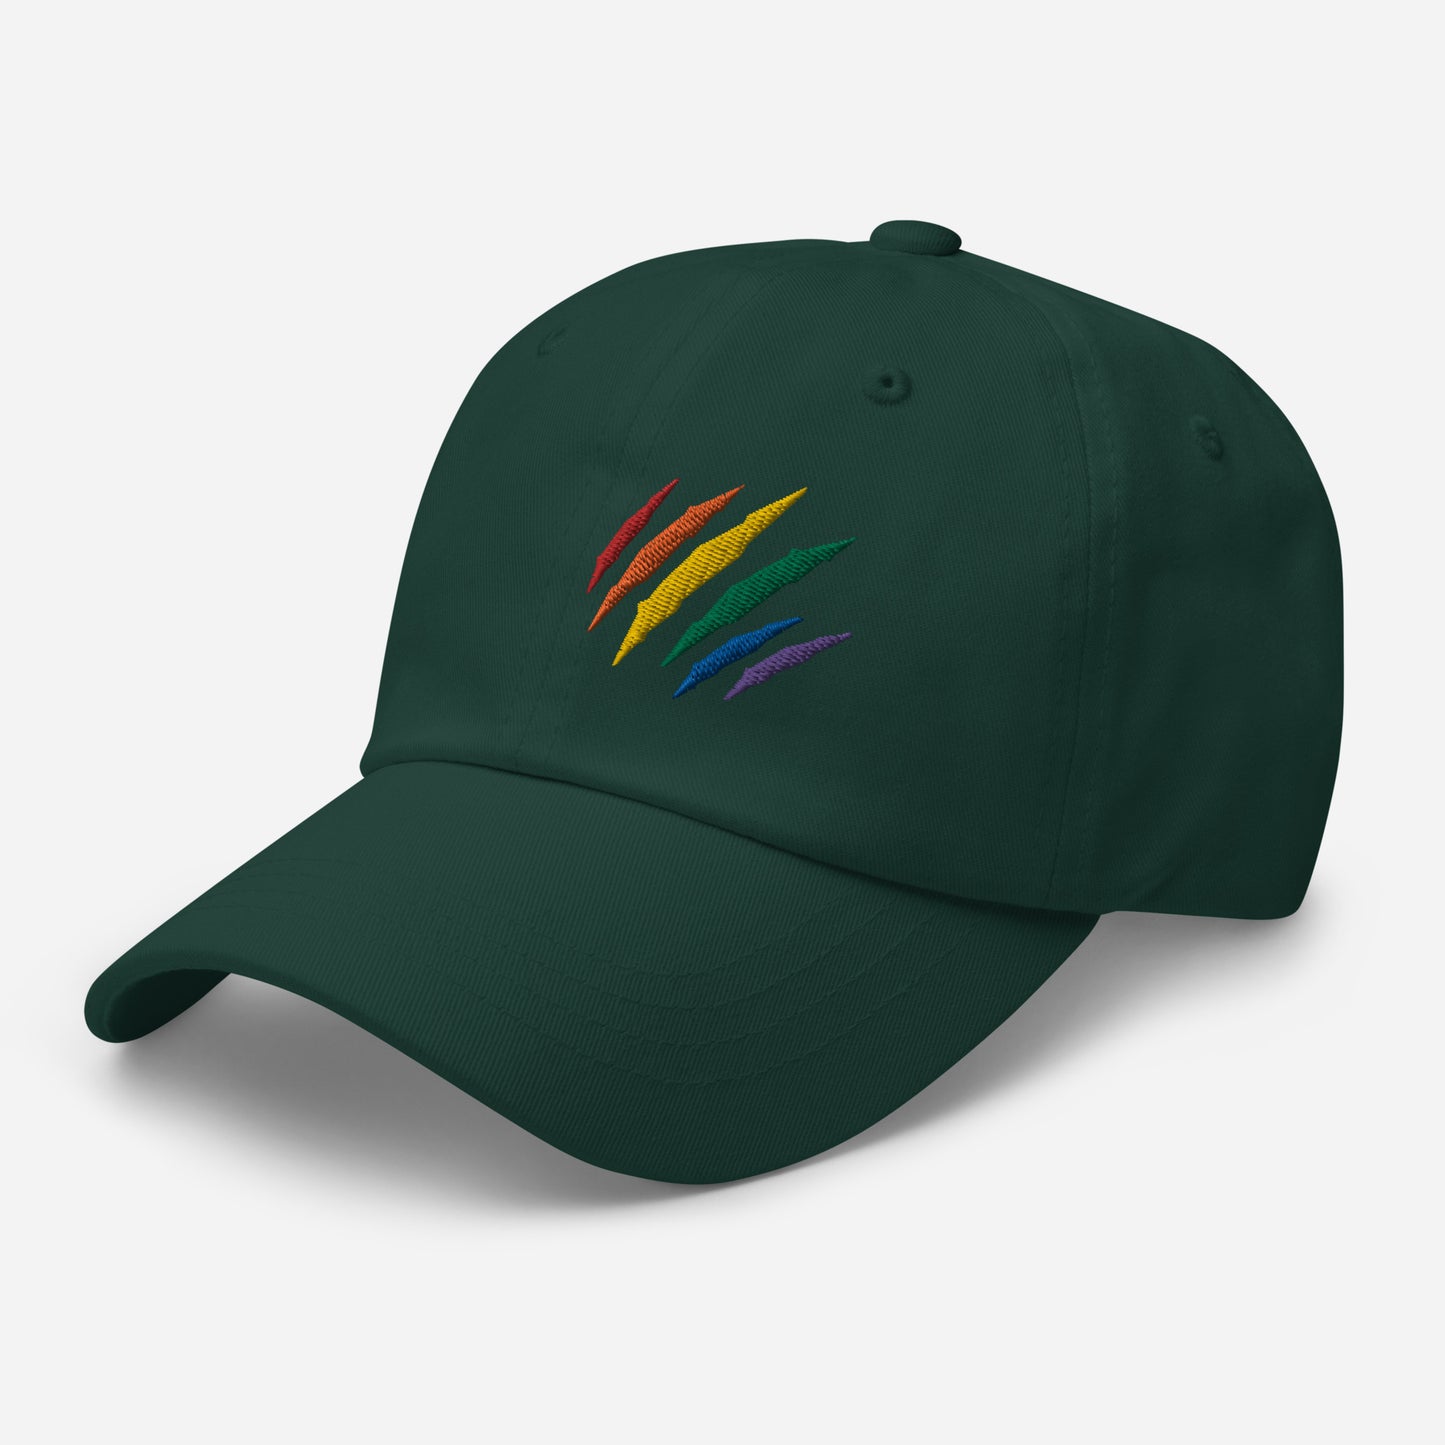 Spruce baseball hat featuring rainbow pride scratch mark embroidery with a low profile, adjustable strap.